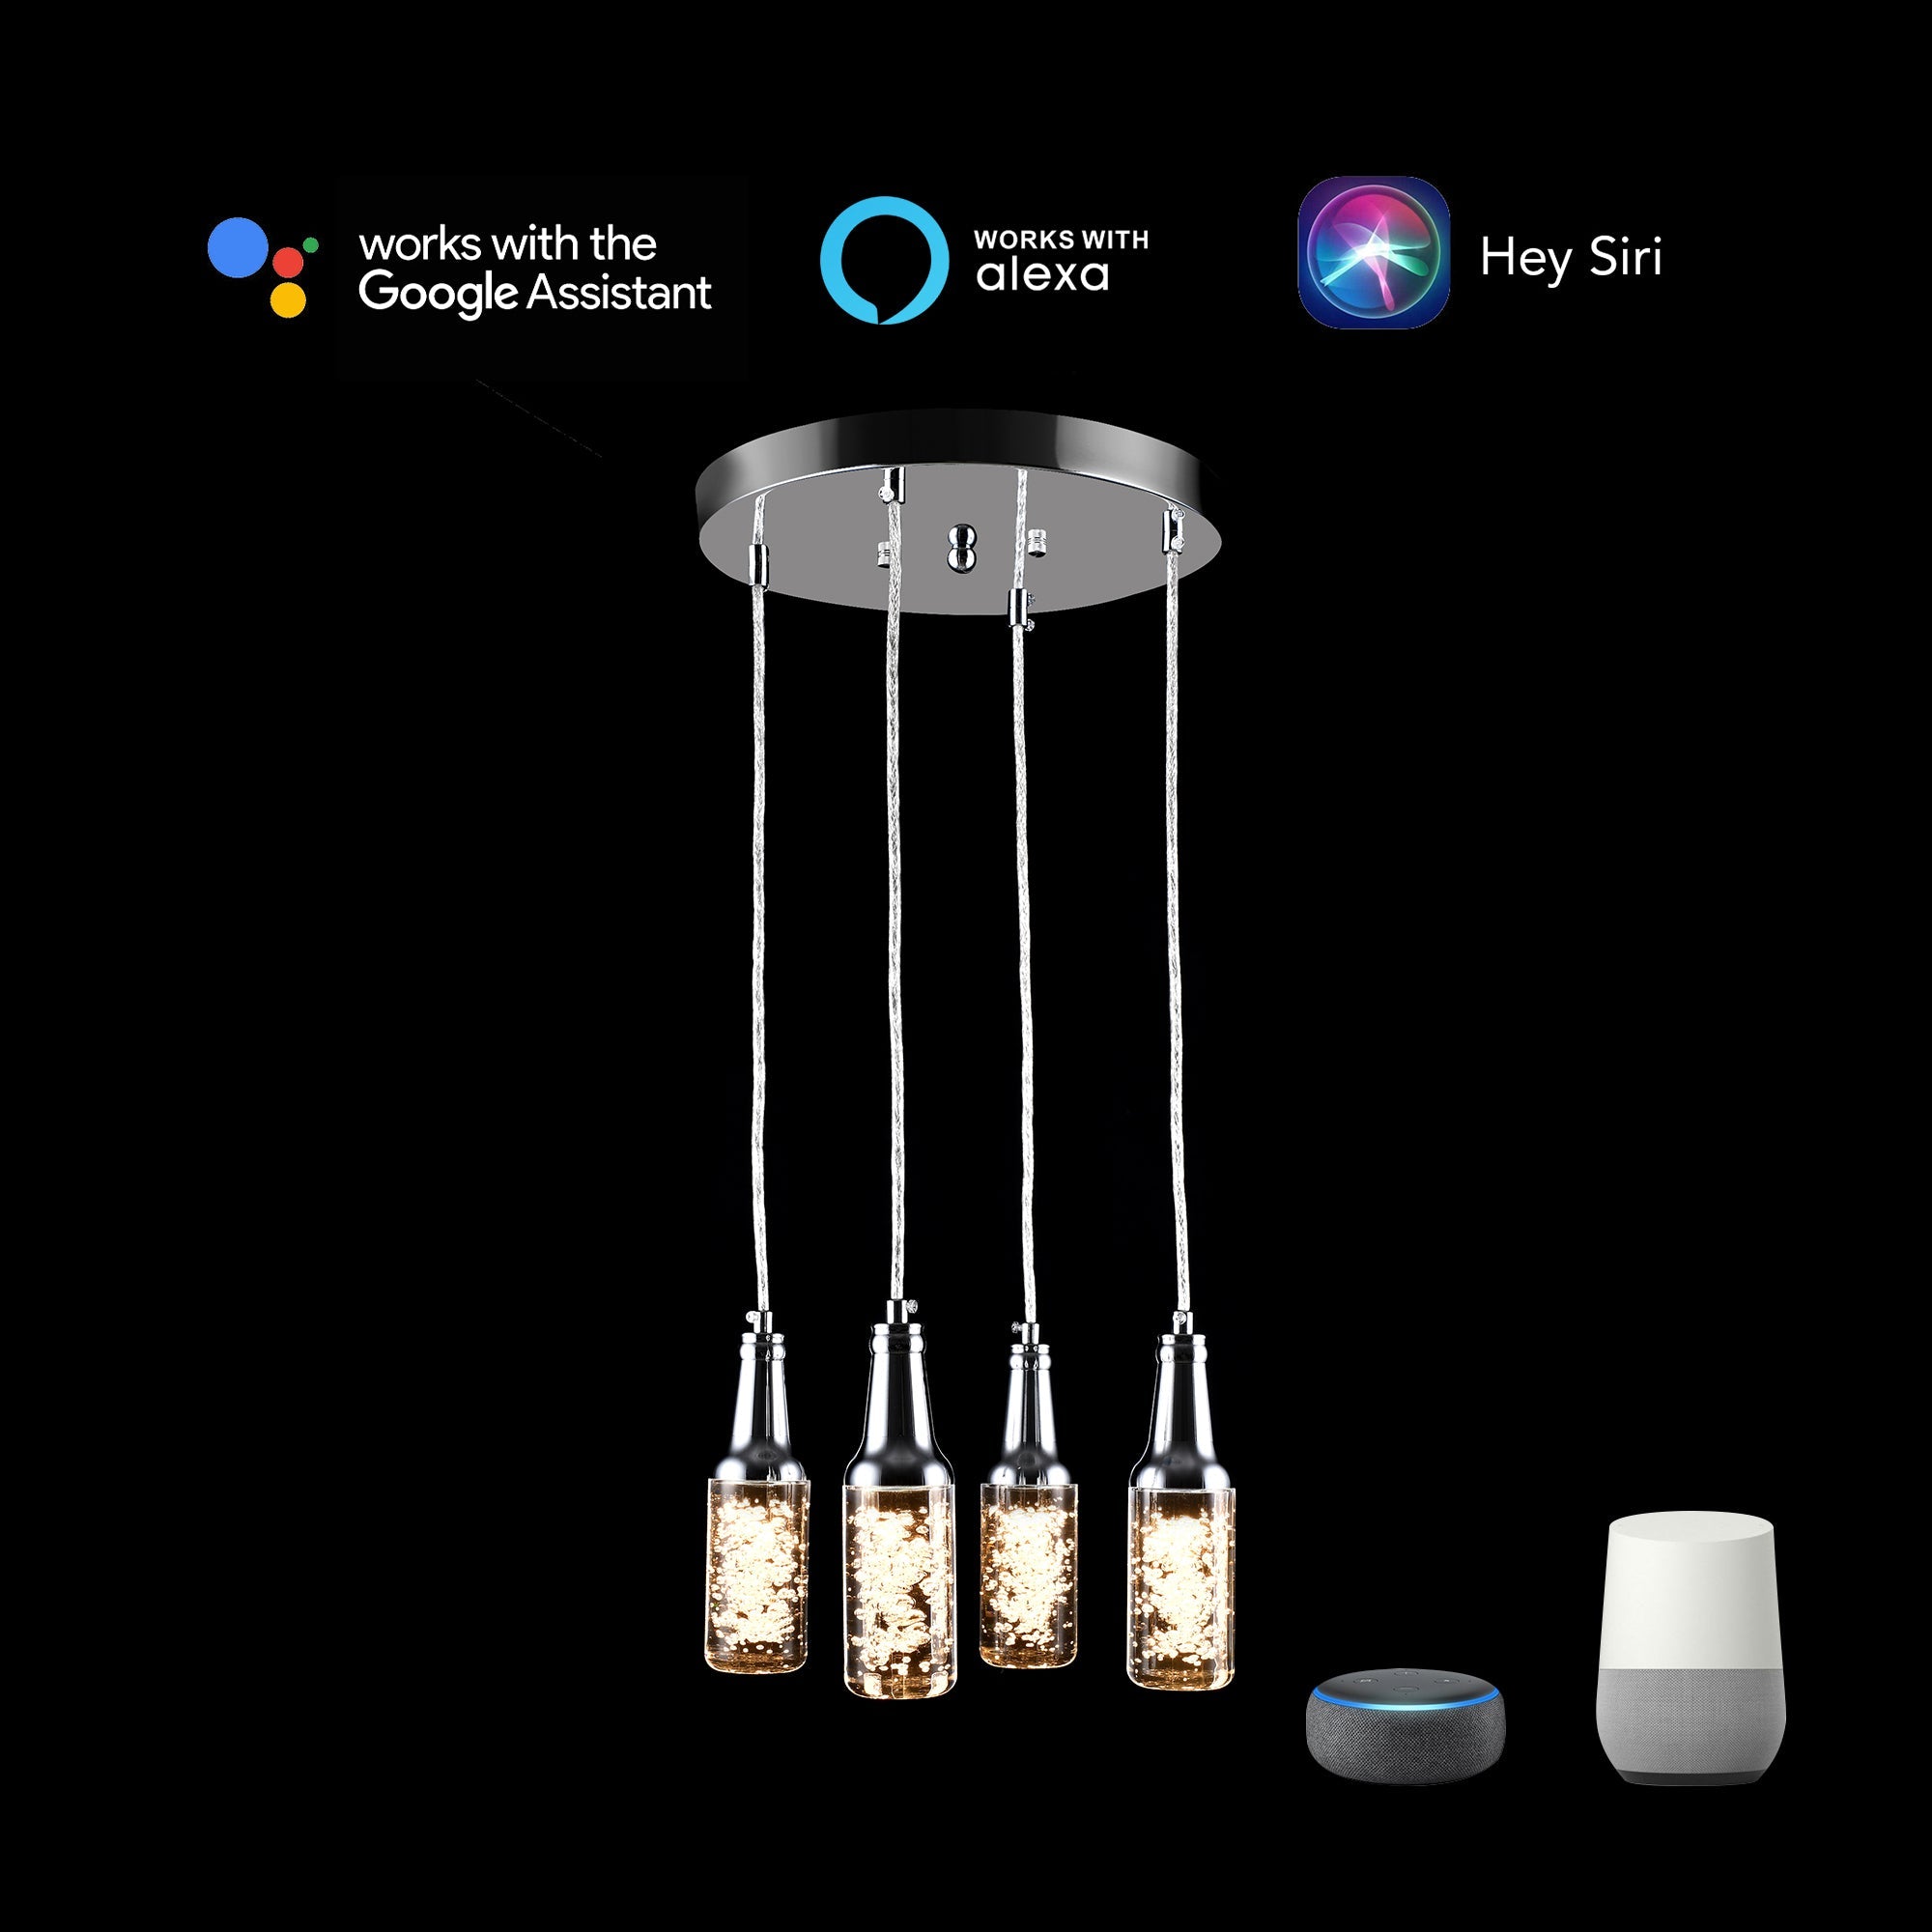 From relax mode to party mode, the Carro Home Patton 4-Pendant Light will set the mood for any occasion in your home! The Paton features cutting-edge RGB and Smart technology to give you fine-tuned control of your home’s lighting, including color, brightness, and variations. The 4-Pendant configuration with translucent lampshades and a silver iron canopy adds style to any décor while delivering bright and vivid lighting.